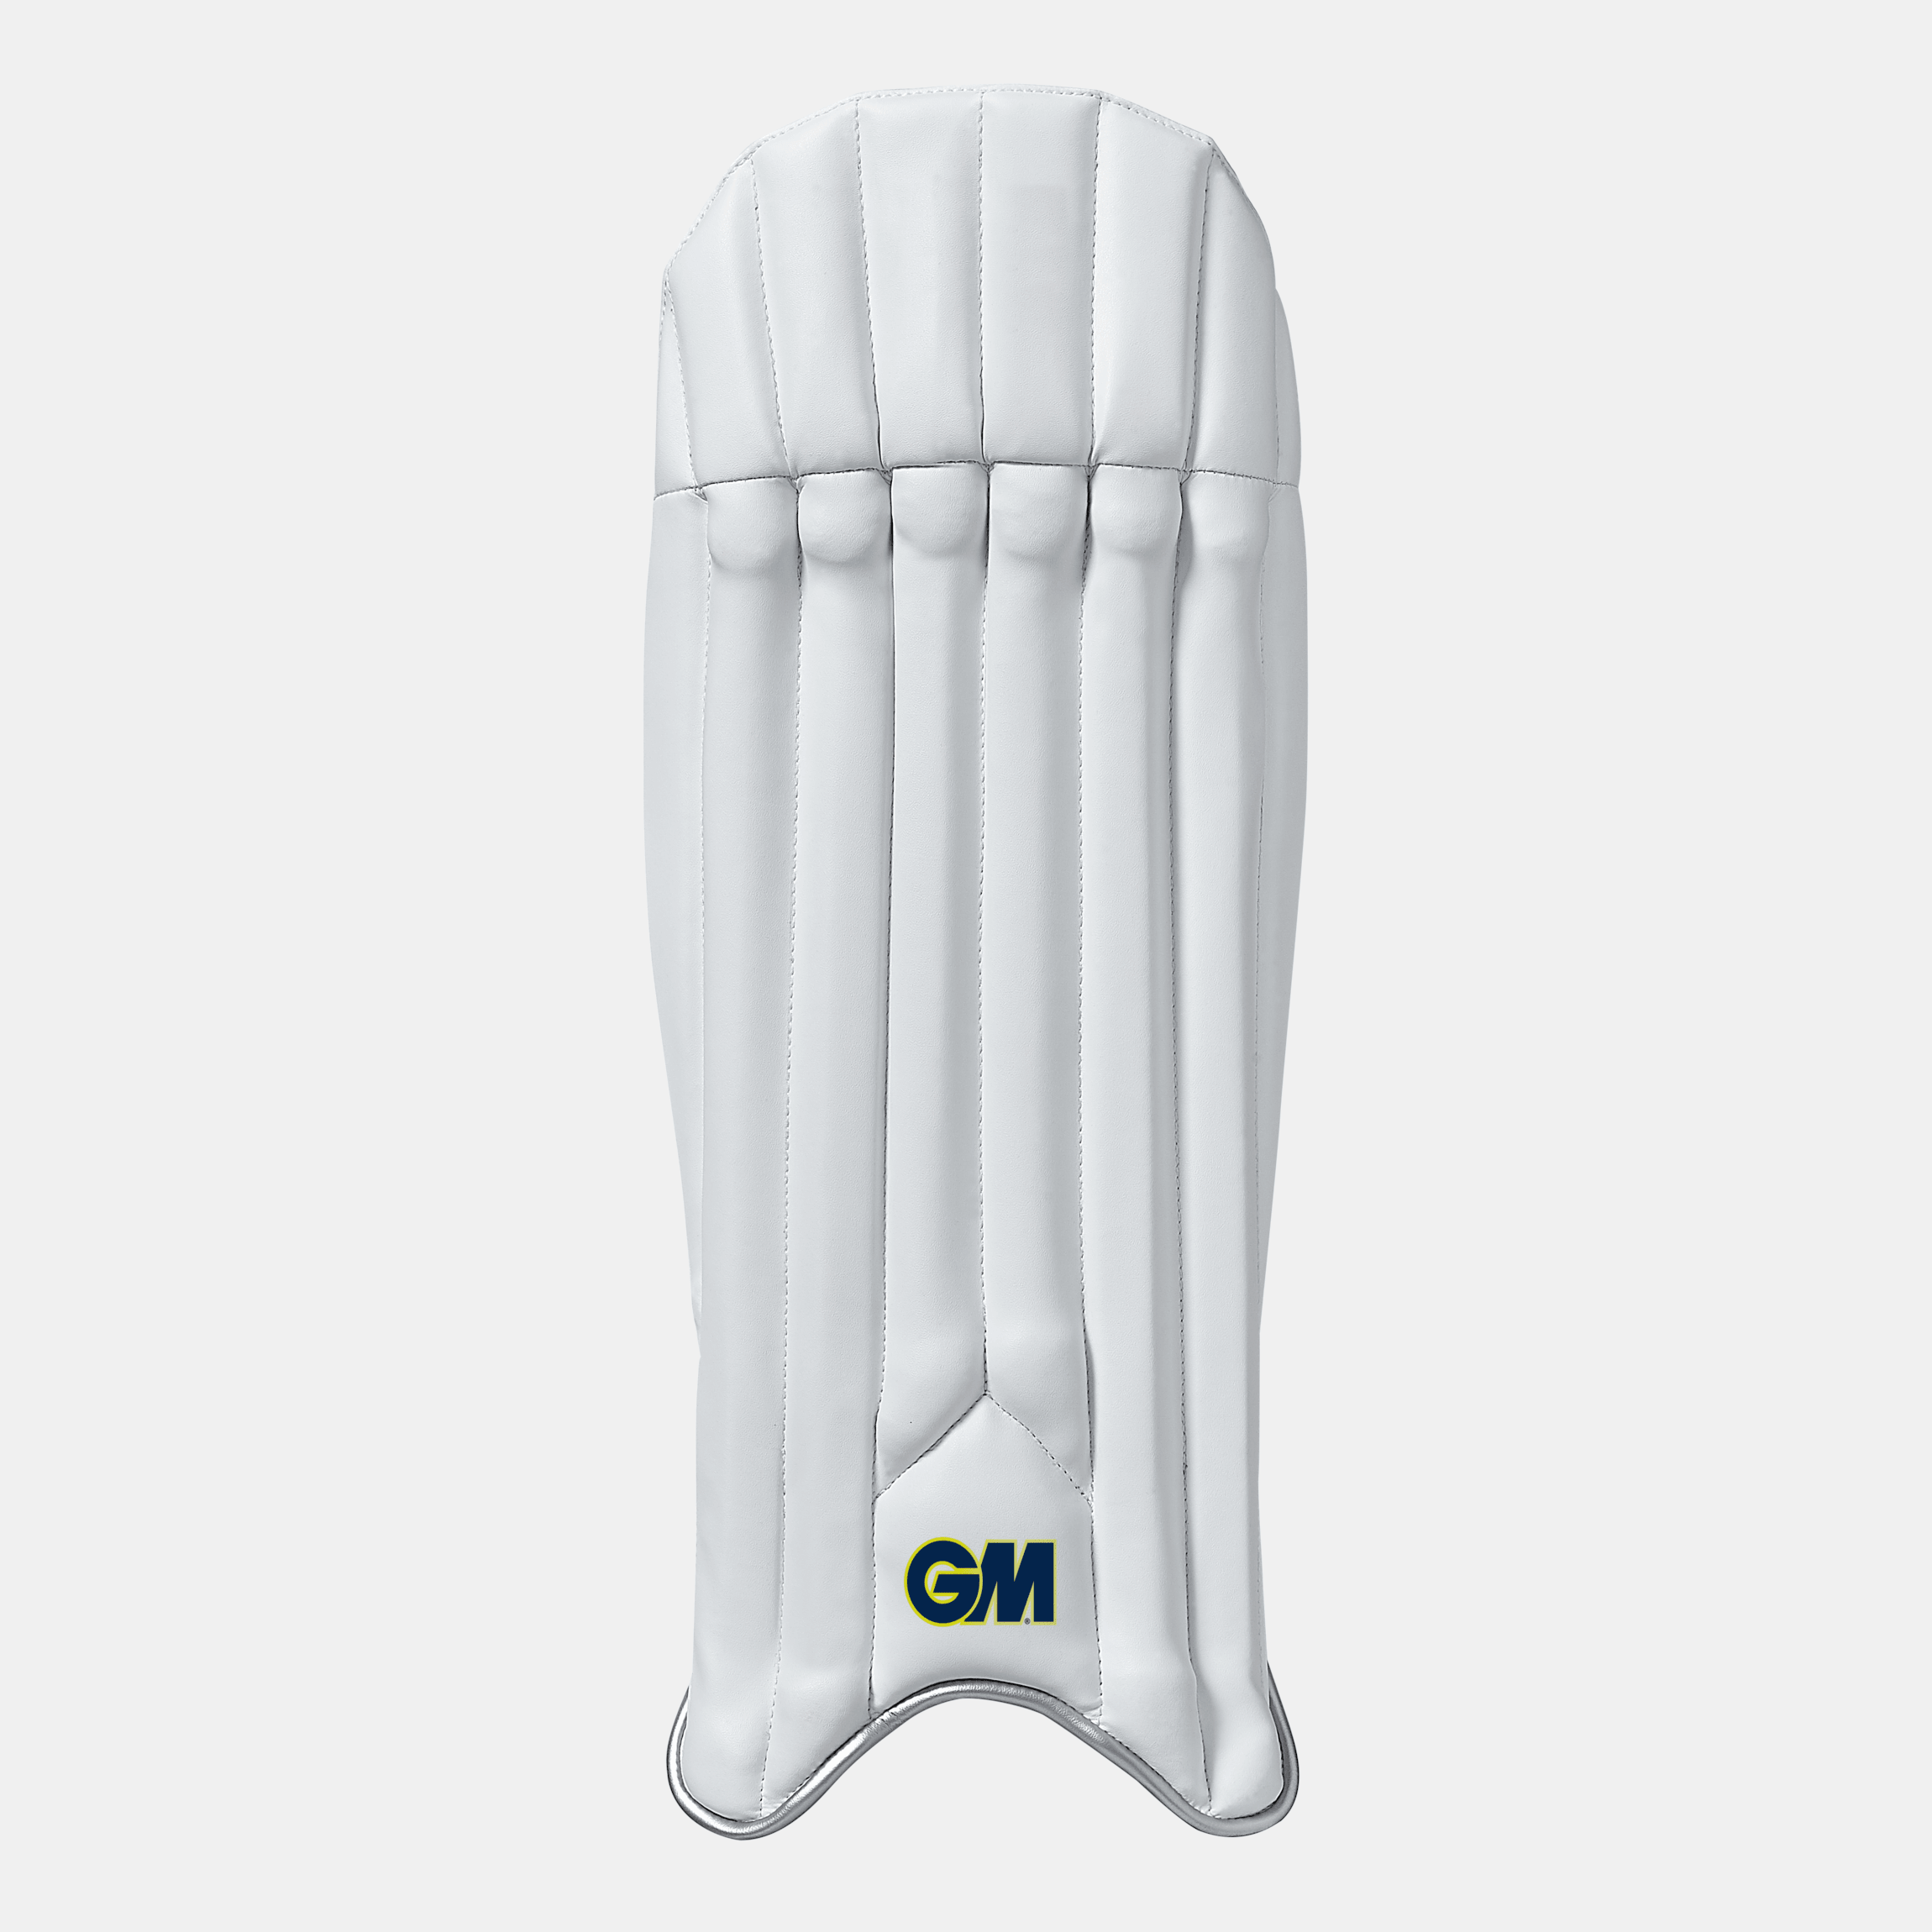 GM Prima Wicket Keeping Pads - ADULT - AT Sports